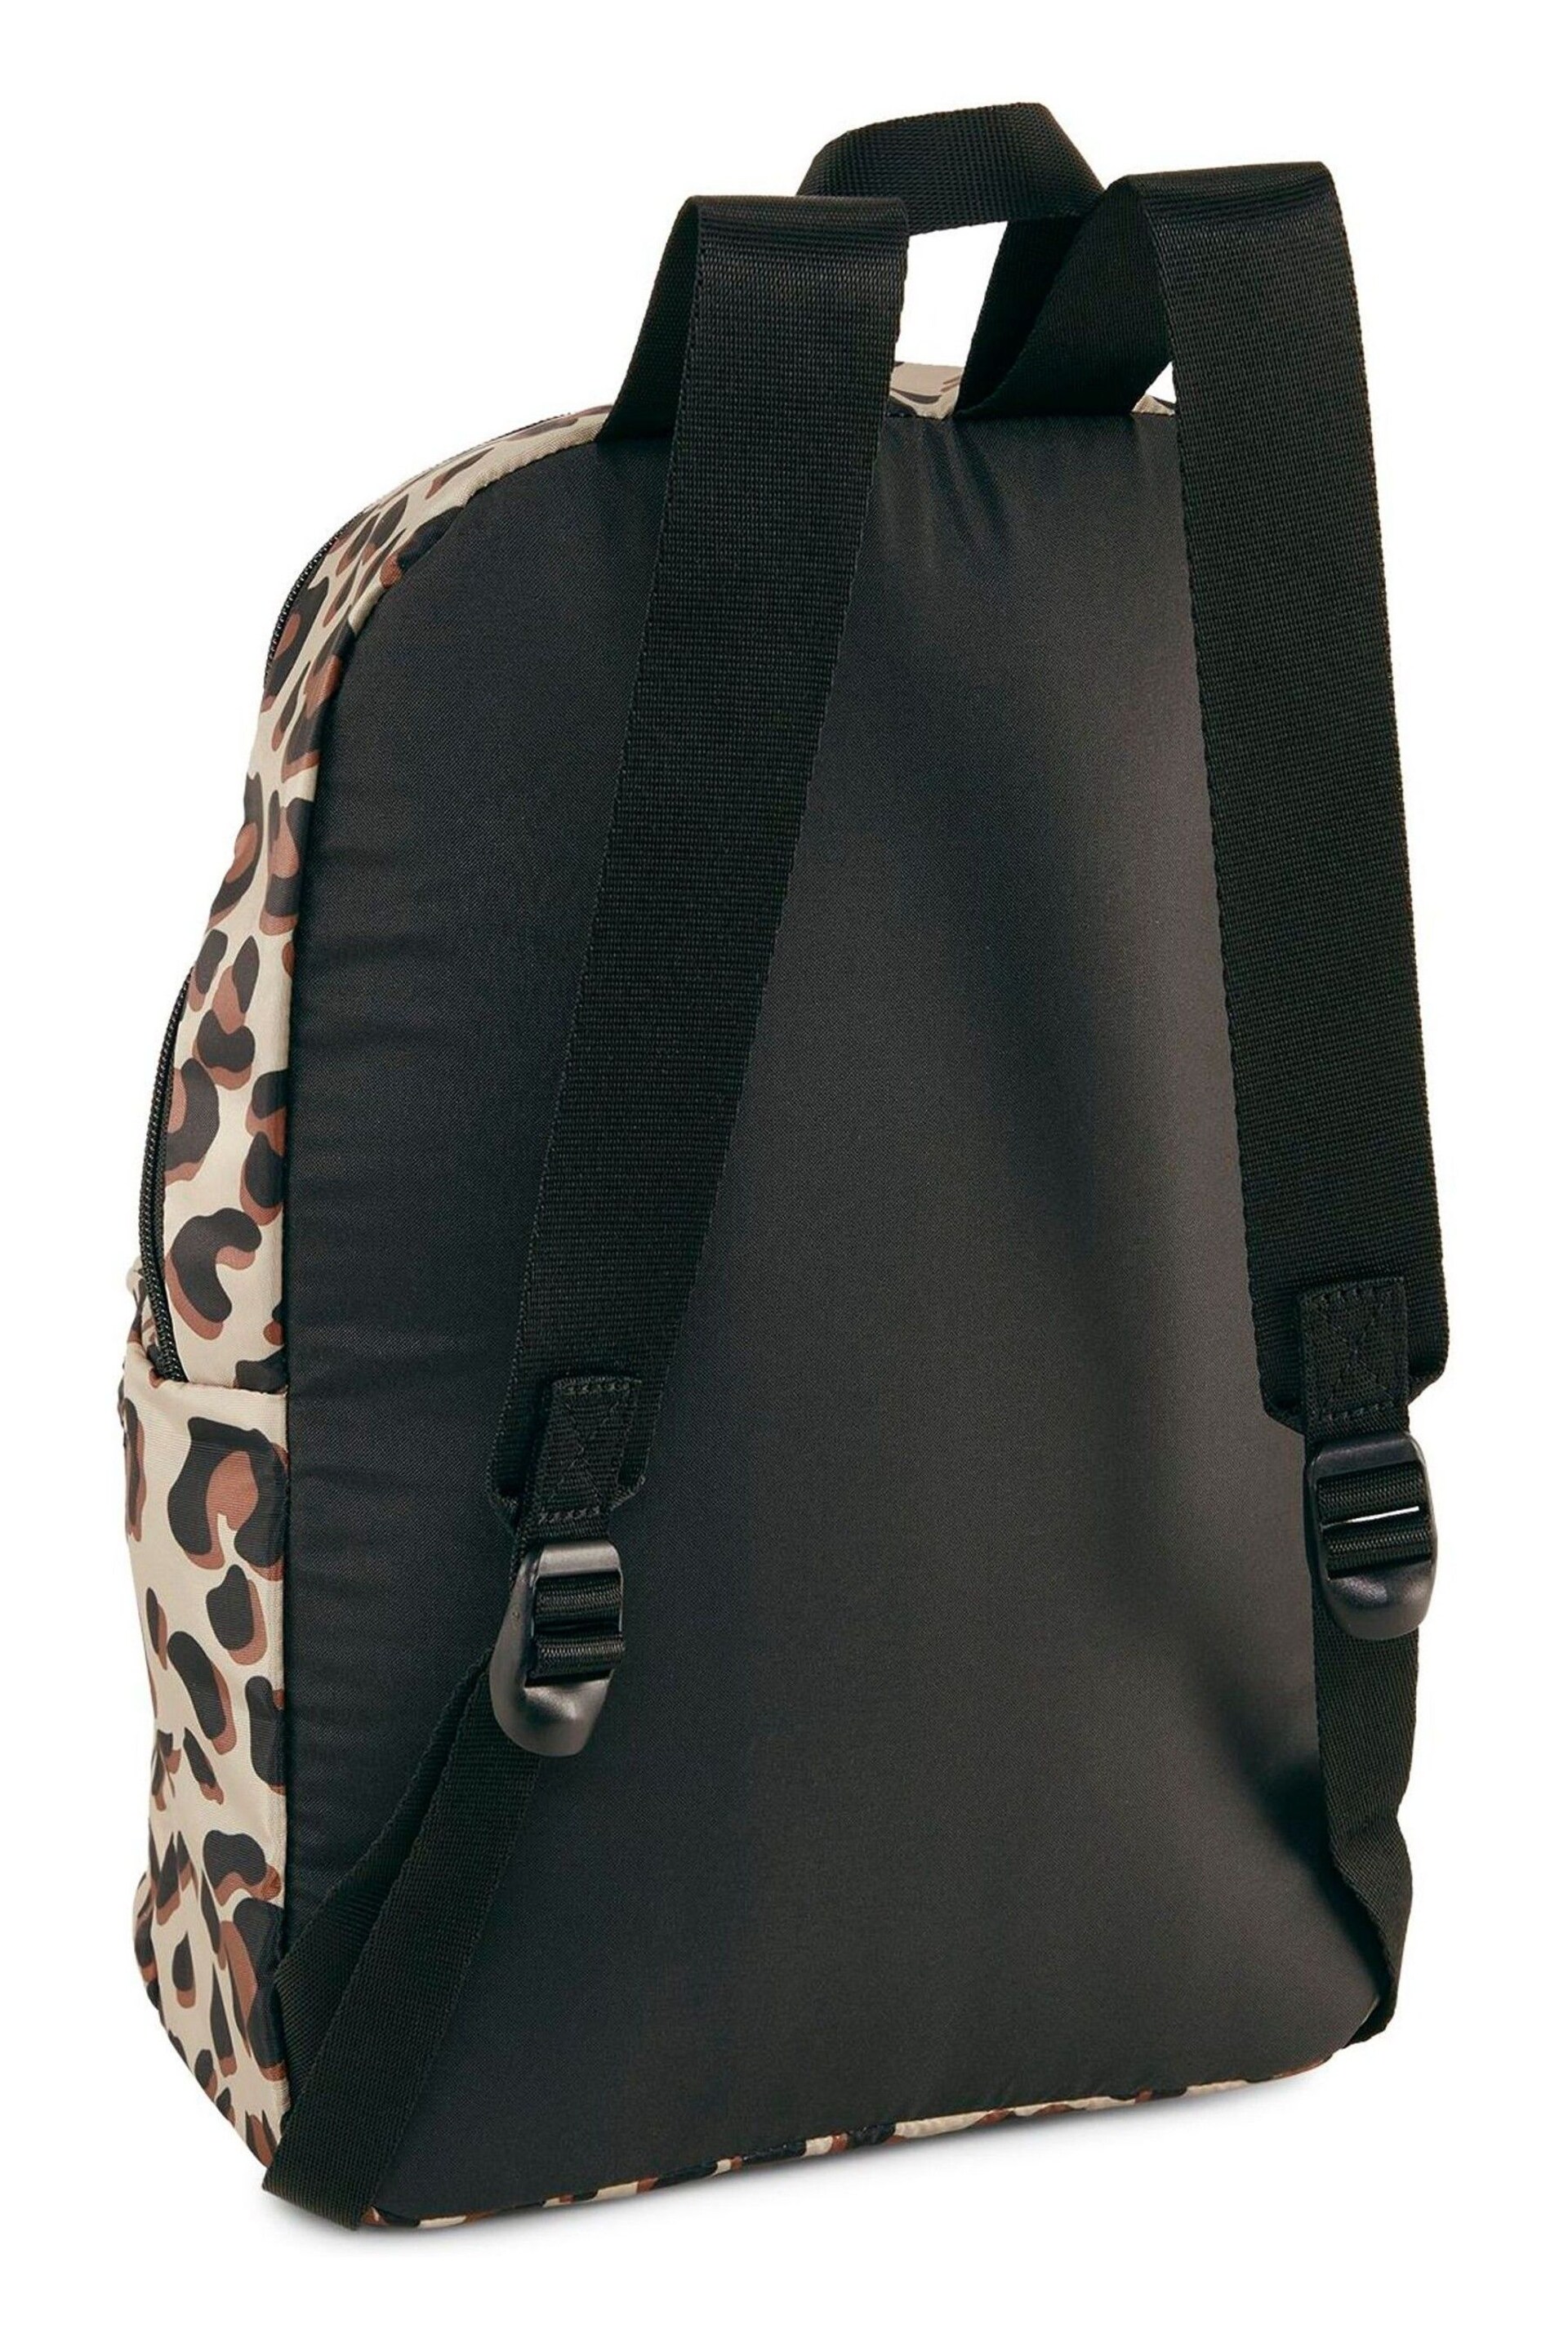 Puma Natural Core Pop Backpack - Image 2 of 5